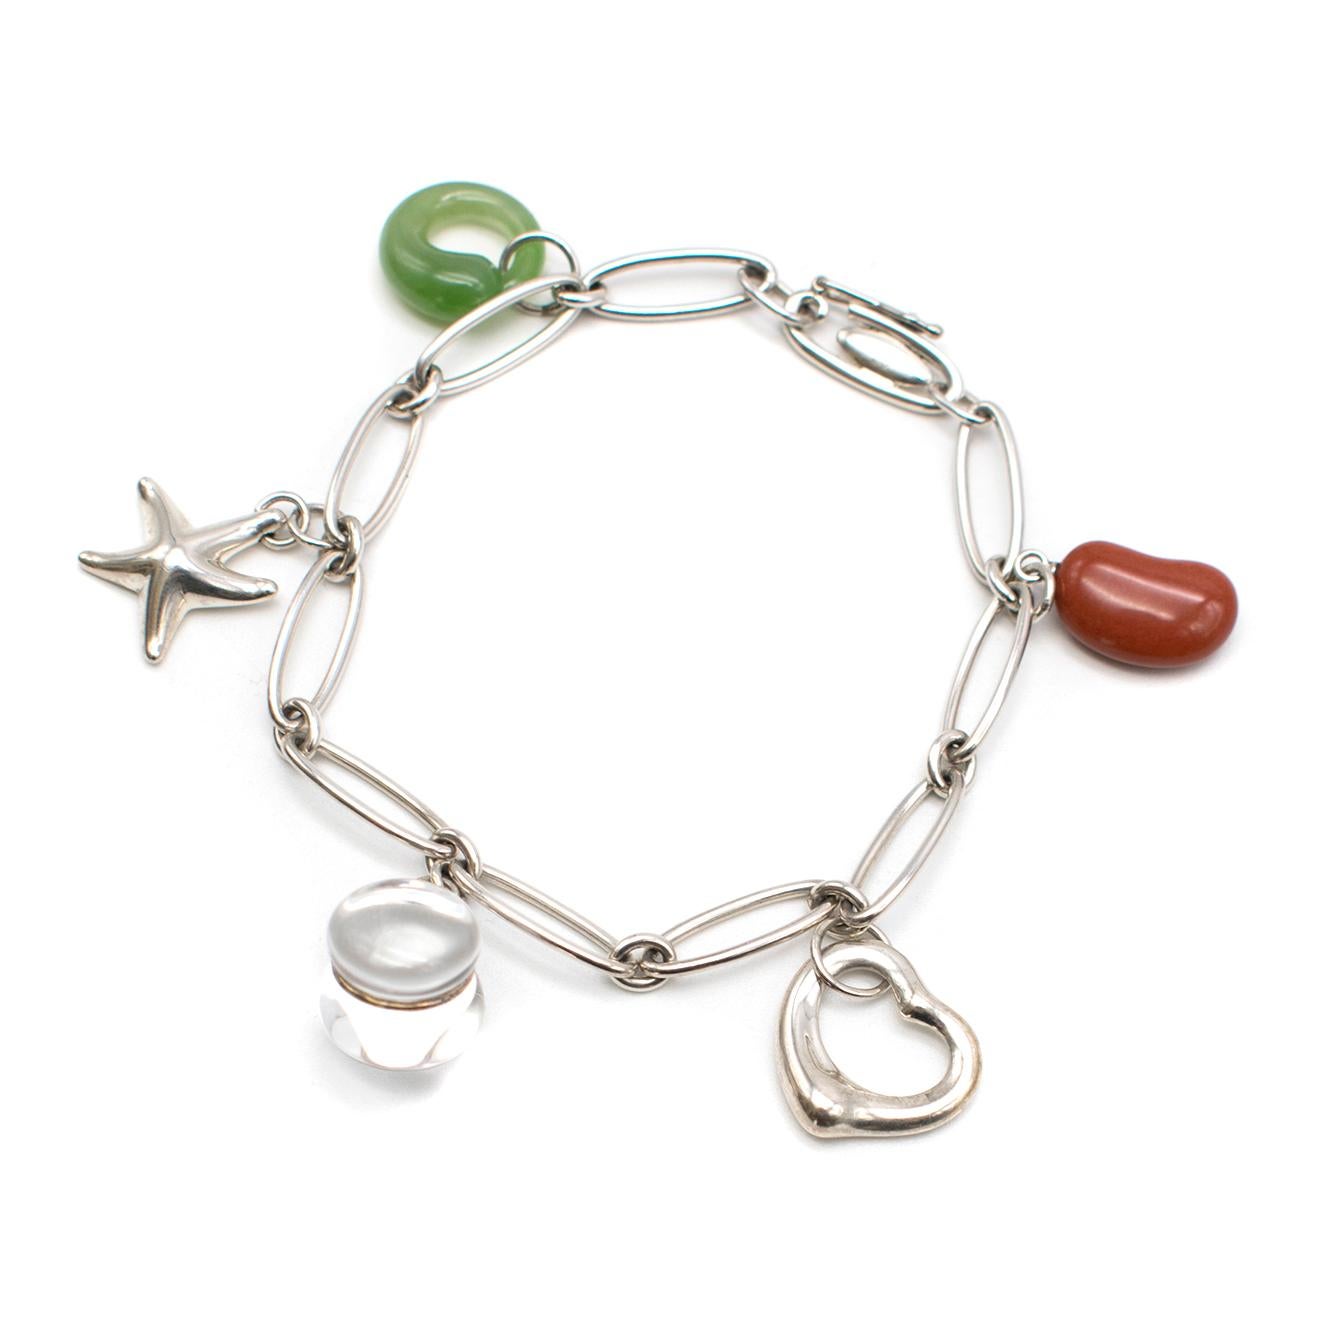 Tiffany & Co. Elsa Peretti Silver Five-Charm Bracelet

- Charm bracelet in sterling silver
- Red jasper Bean
- Sterling silver Open Heart 
- Rock crystal Toy
- Sterling silver Starfish 
- Green jade Eternal Circle. 

Please note, these items are